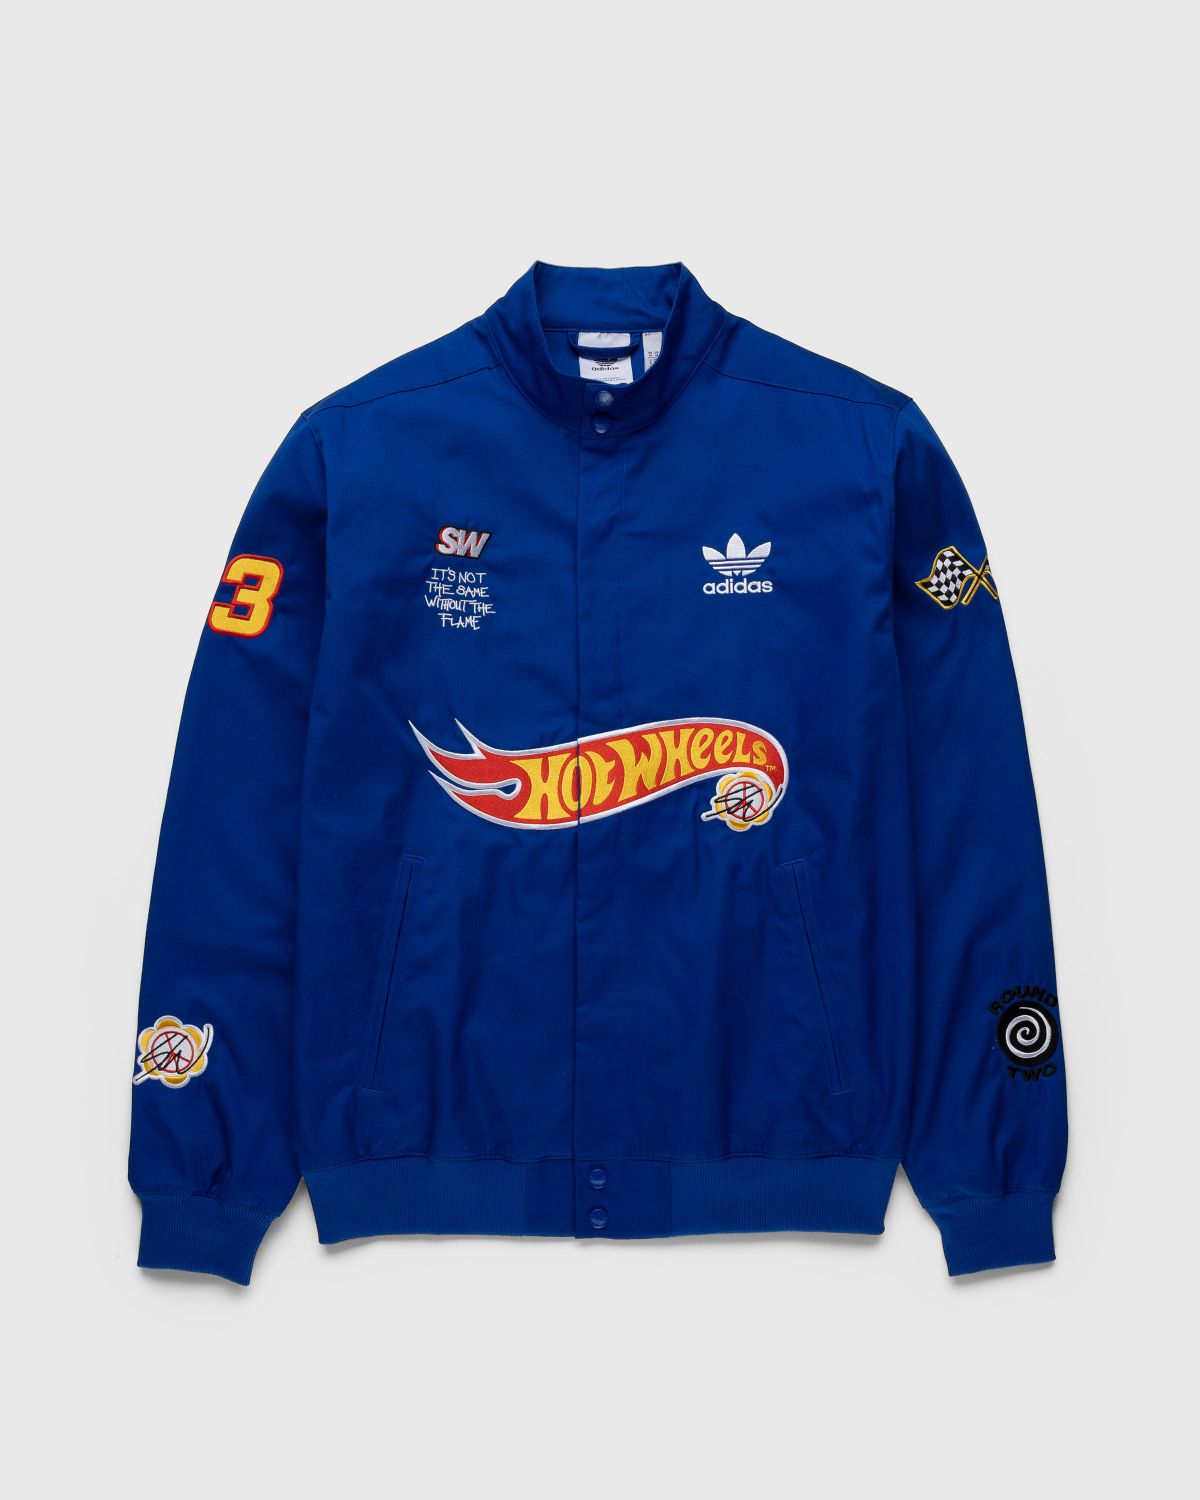 Adidas – Sean Wotherspoon x Hot Wheels Race Jacket Blue - Jackets - Blue - Image 1